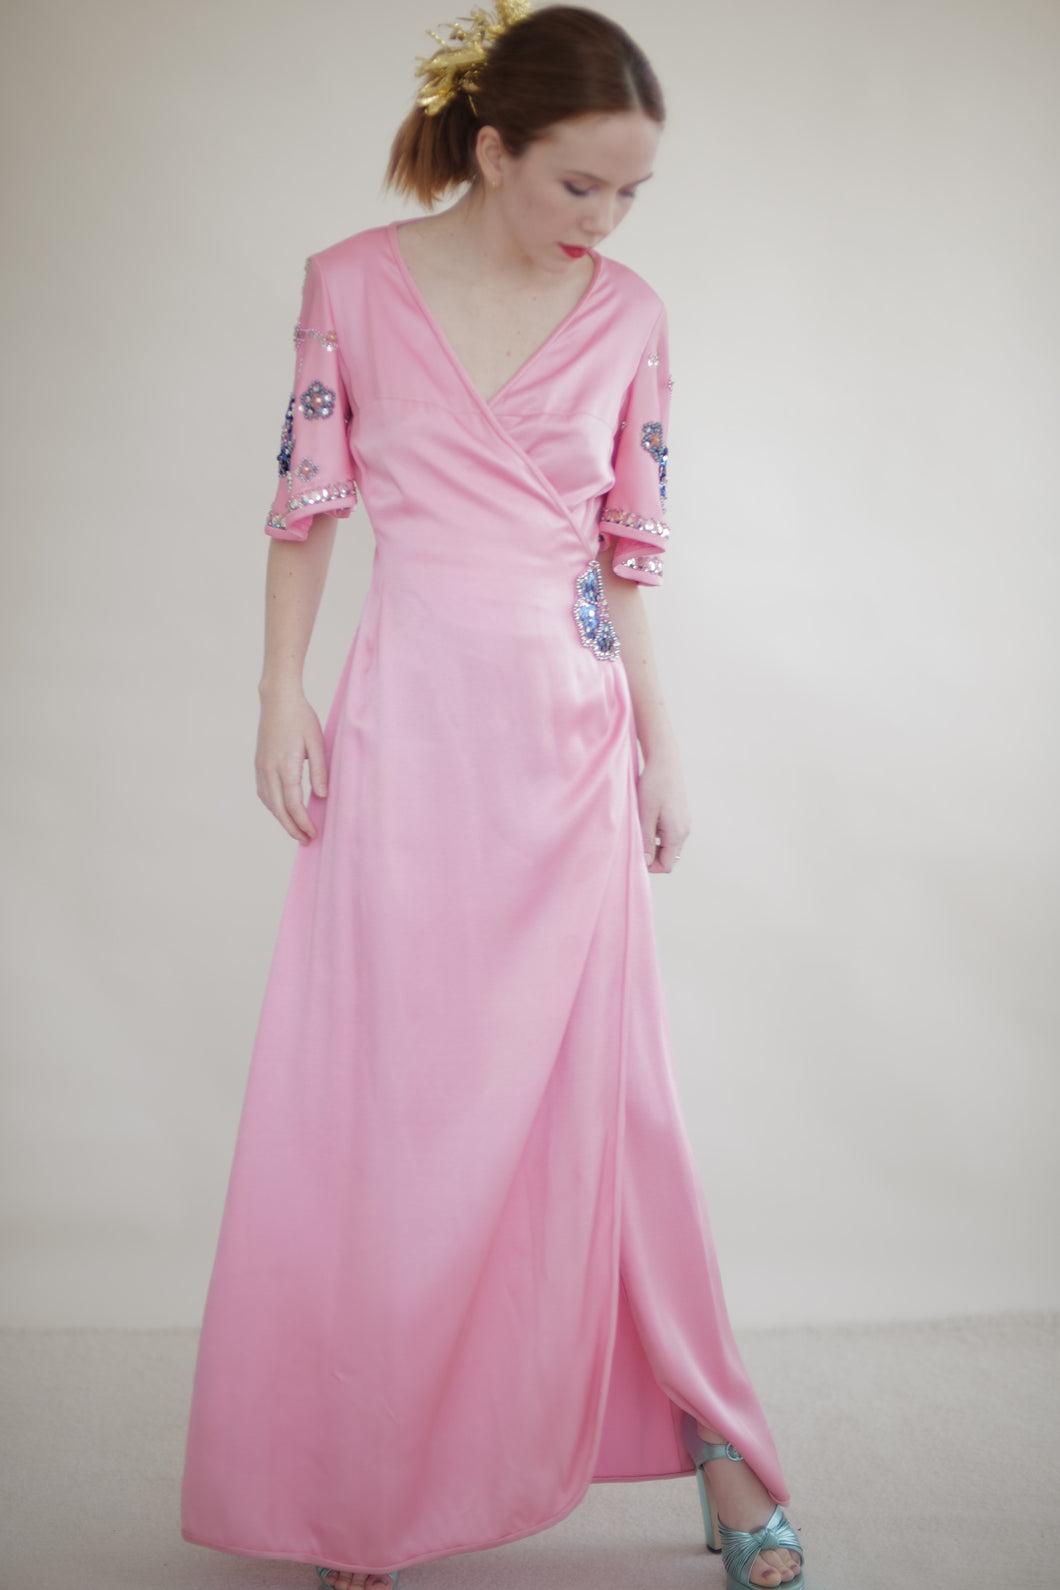 1970's Pink Gucci Inspired Wrap Dress